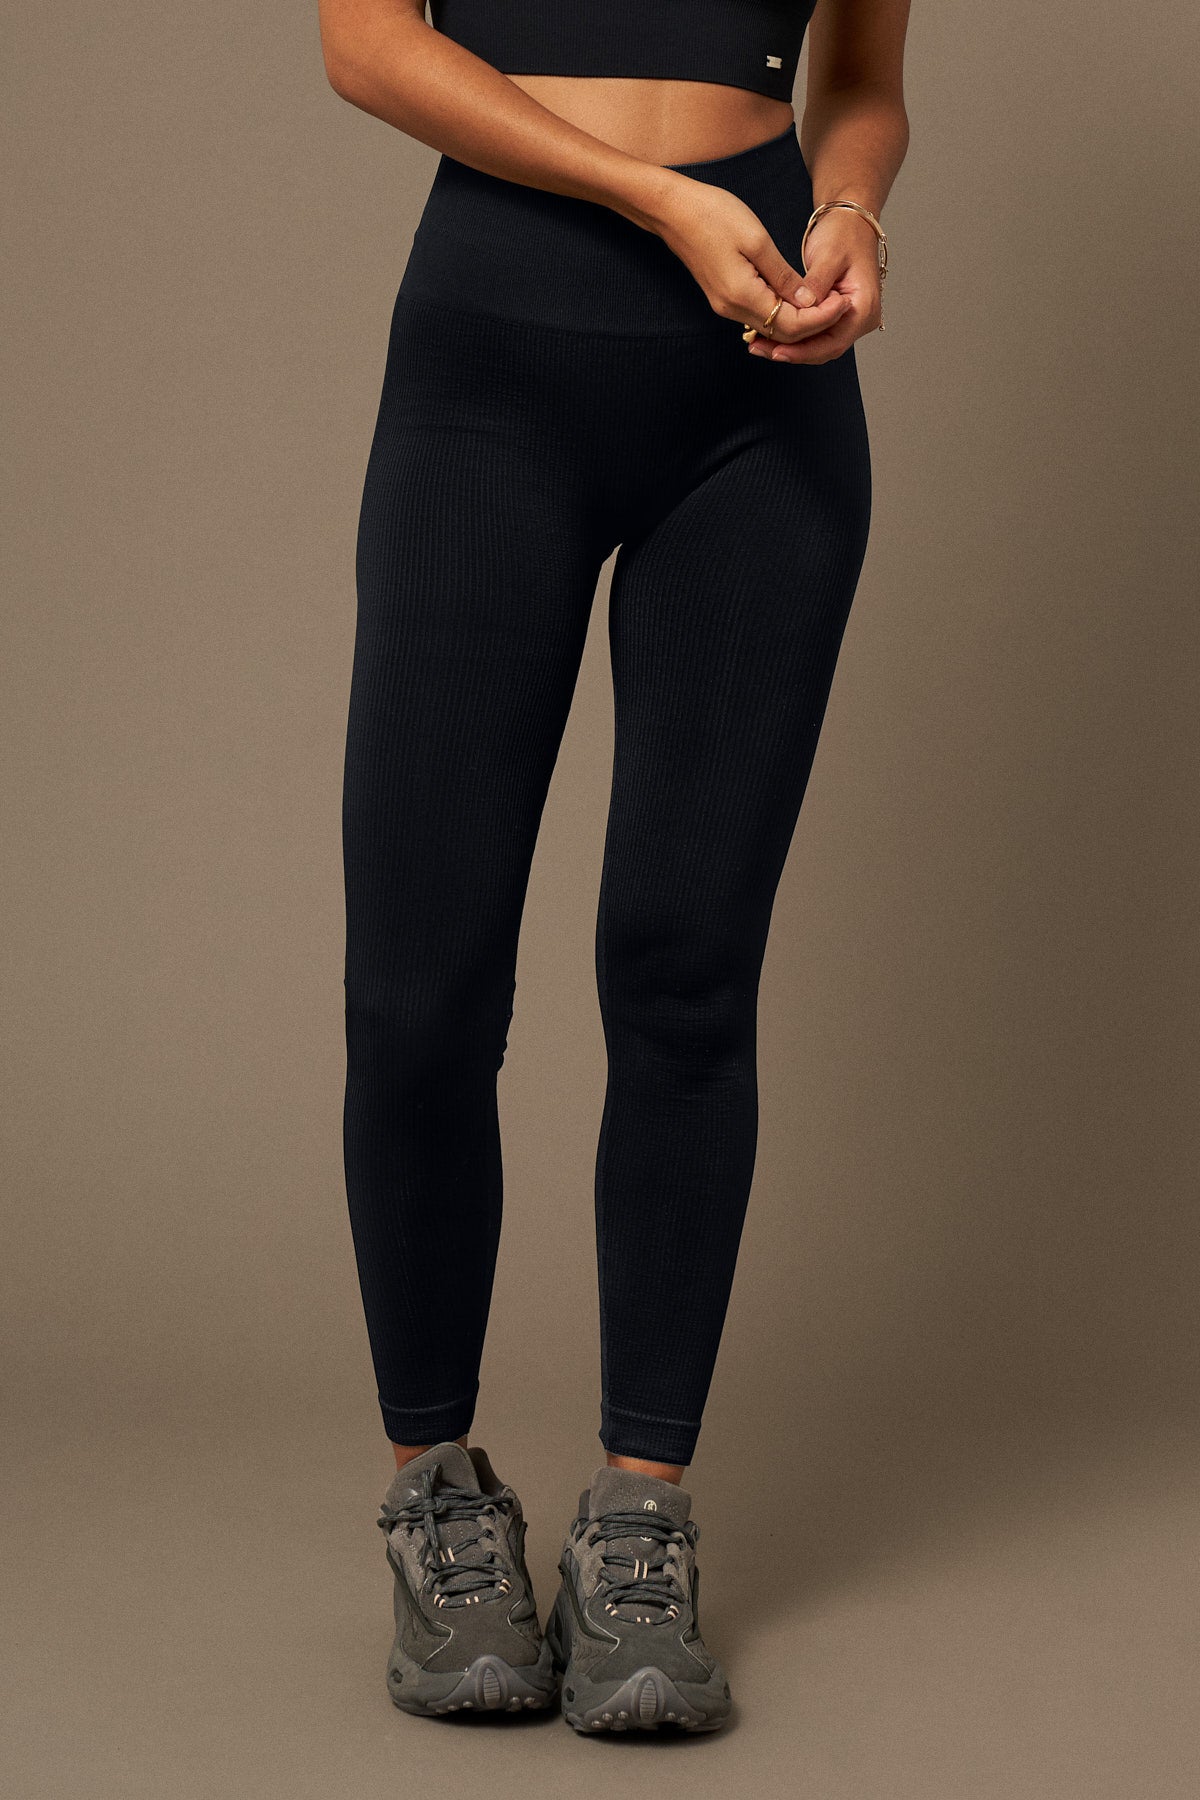 Beyond Leg in Navy-Long Leggings-Shop Sustainable Recycled Yoga Leggings Women's Clothing On-line Barcelona Believe Athletics Sustainable Recycled Yoga Clothes